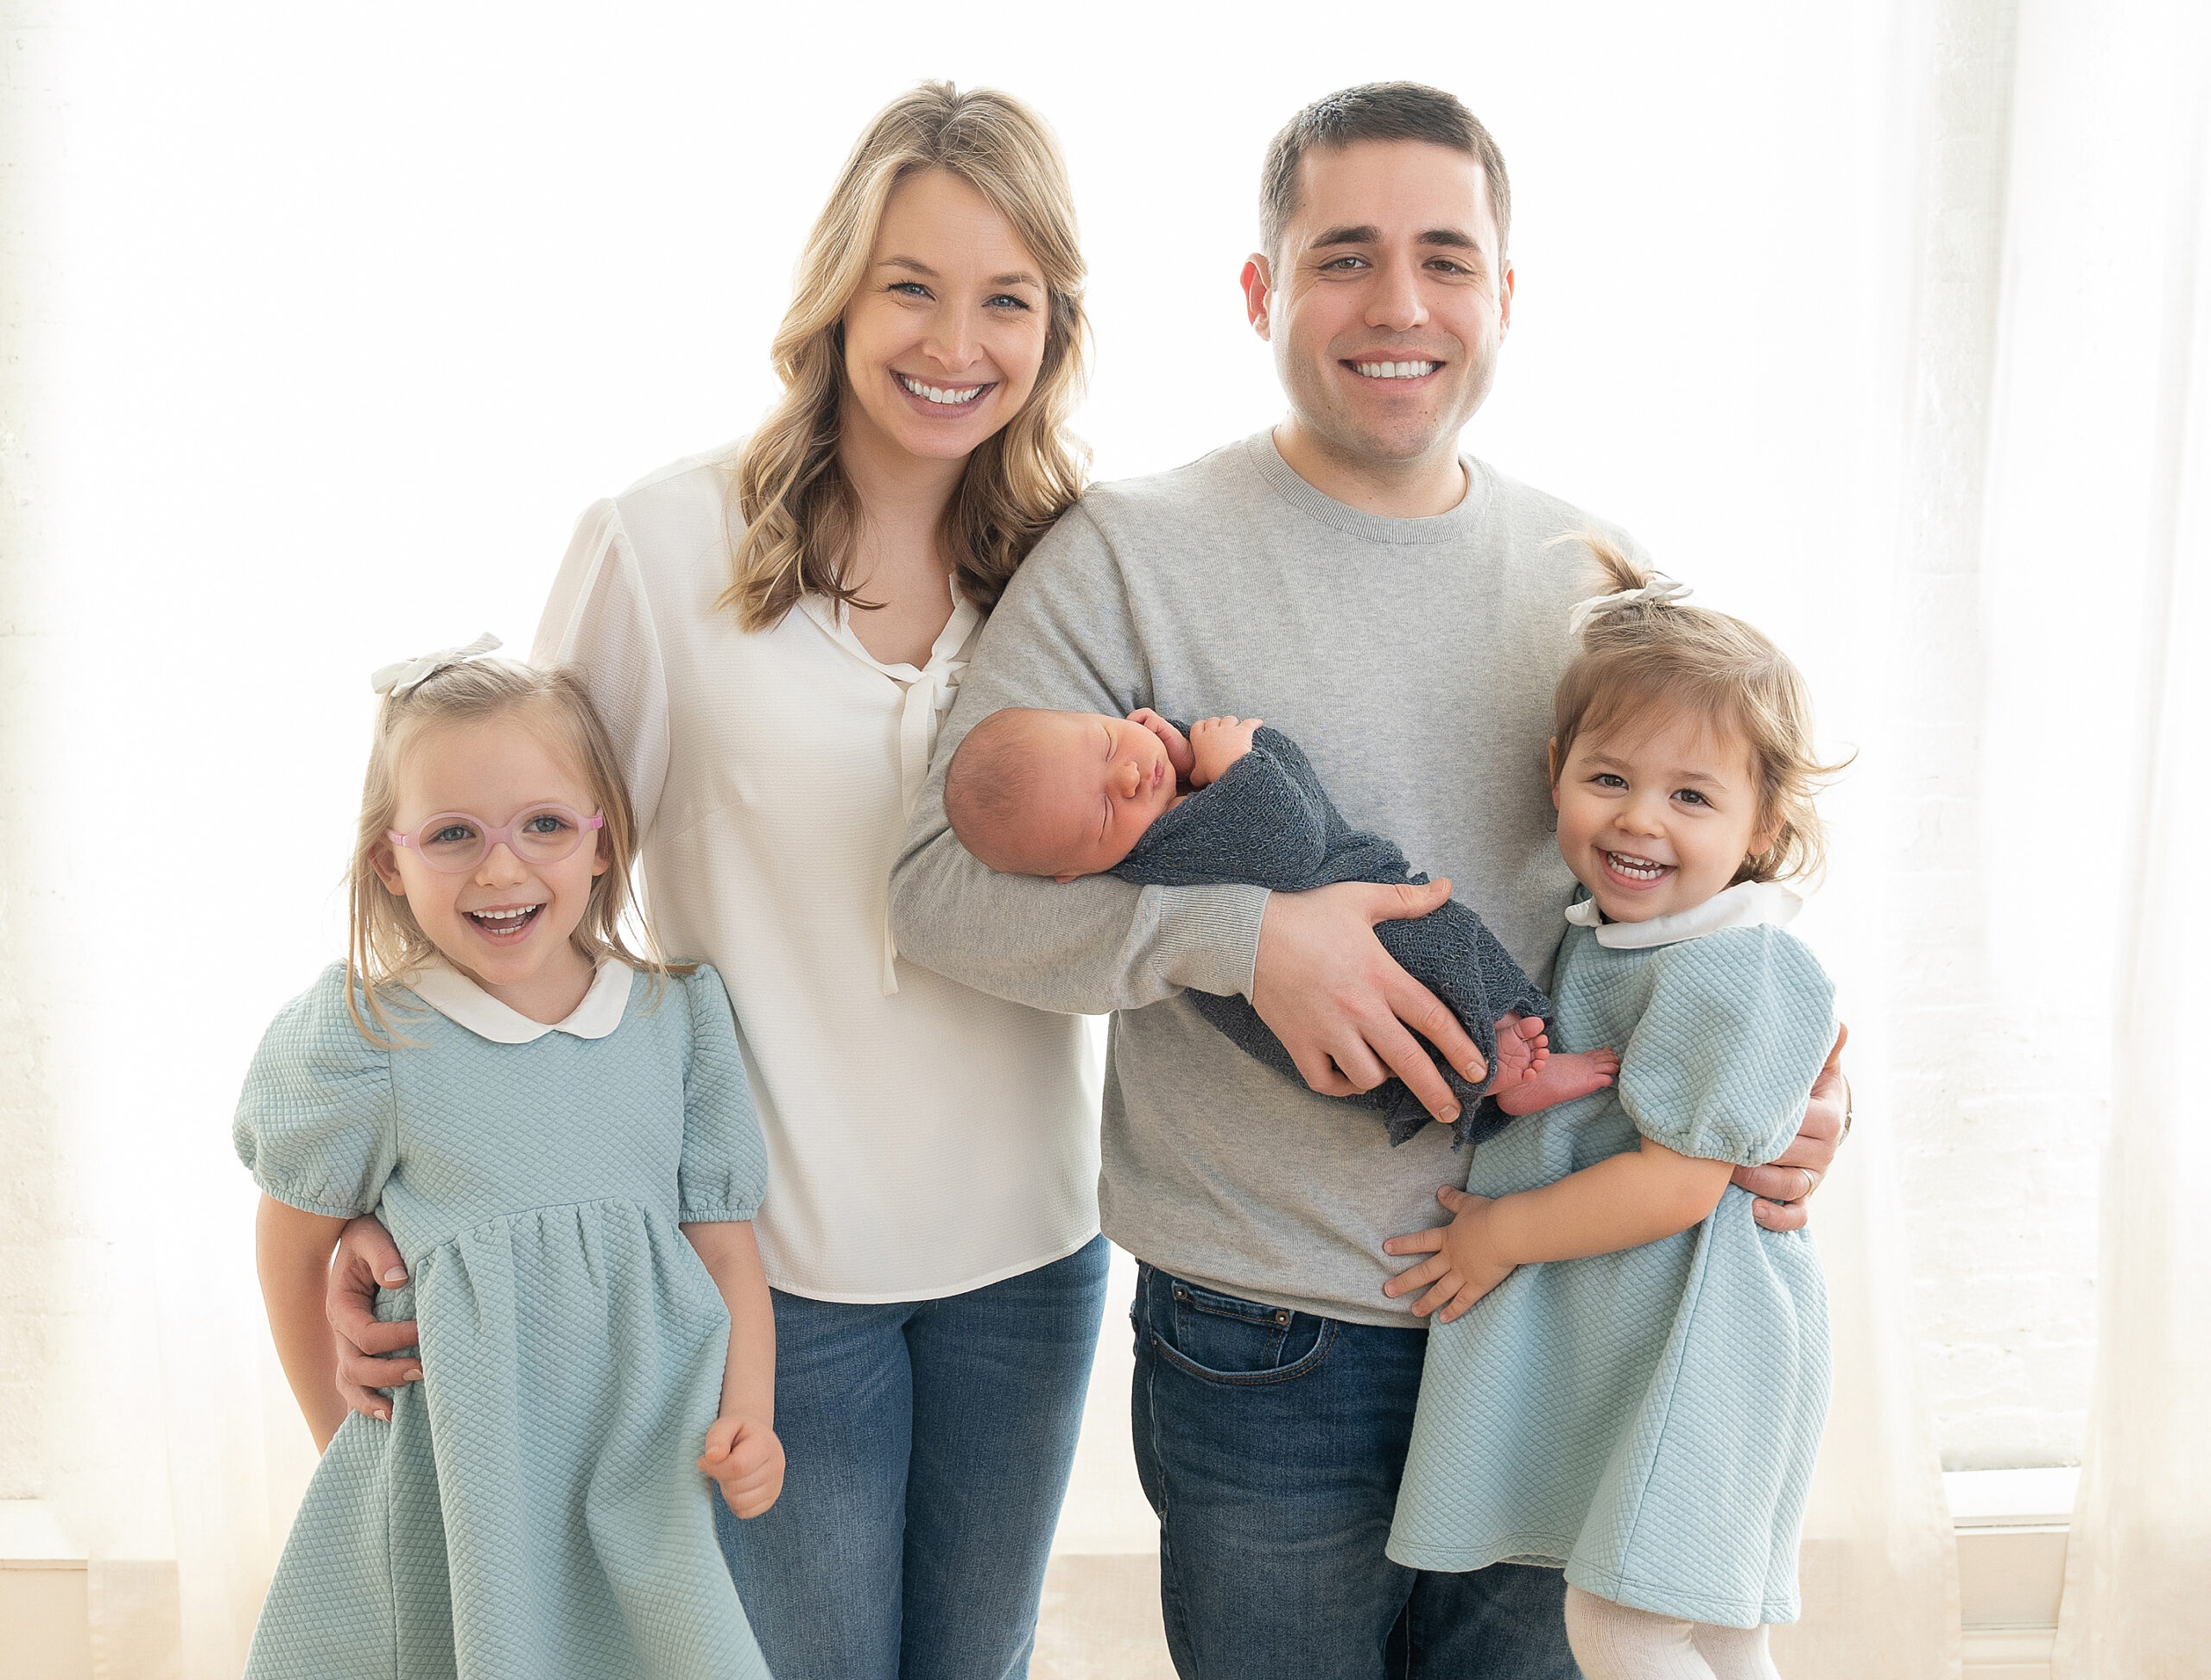 Family of five with two little girls in matching dresses and a little newborn baby.